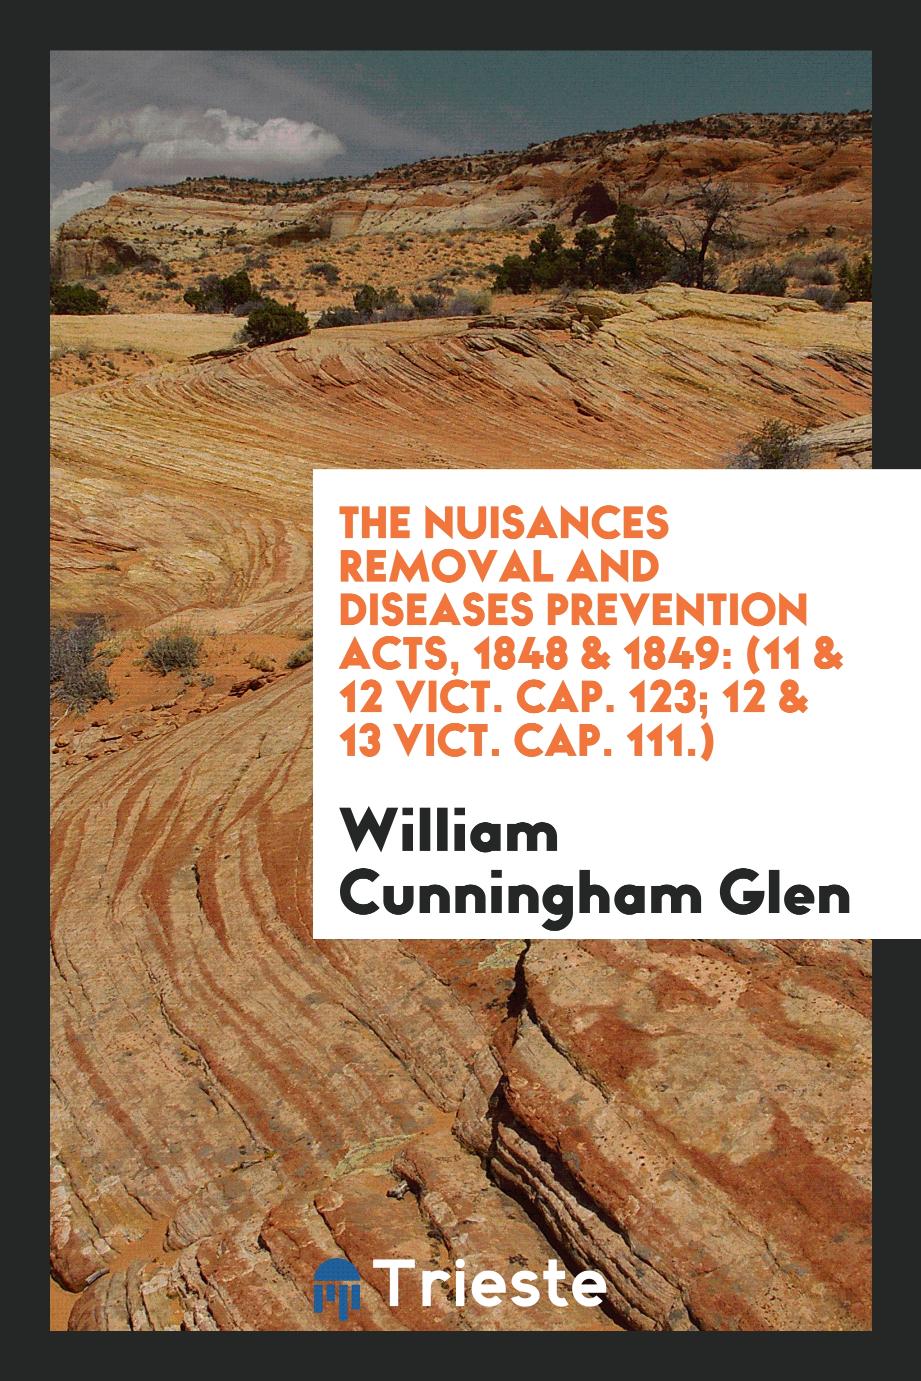 The Nuisances Removal and Diseases Prevention Acts, 1848 & 1849: (11 & 12 VICT. Cap. 123; 12 & 13 VICT. Cap. 111.)